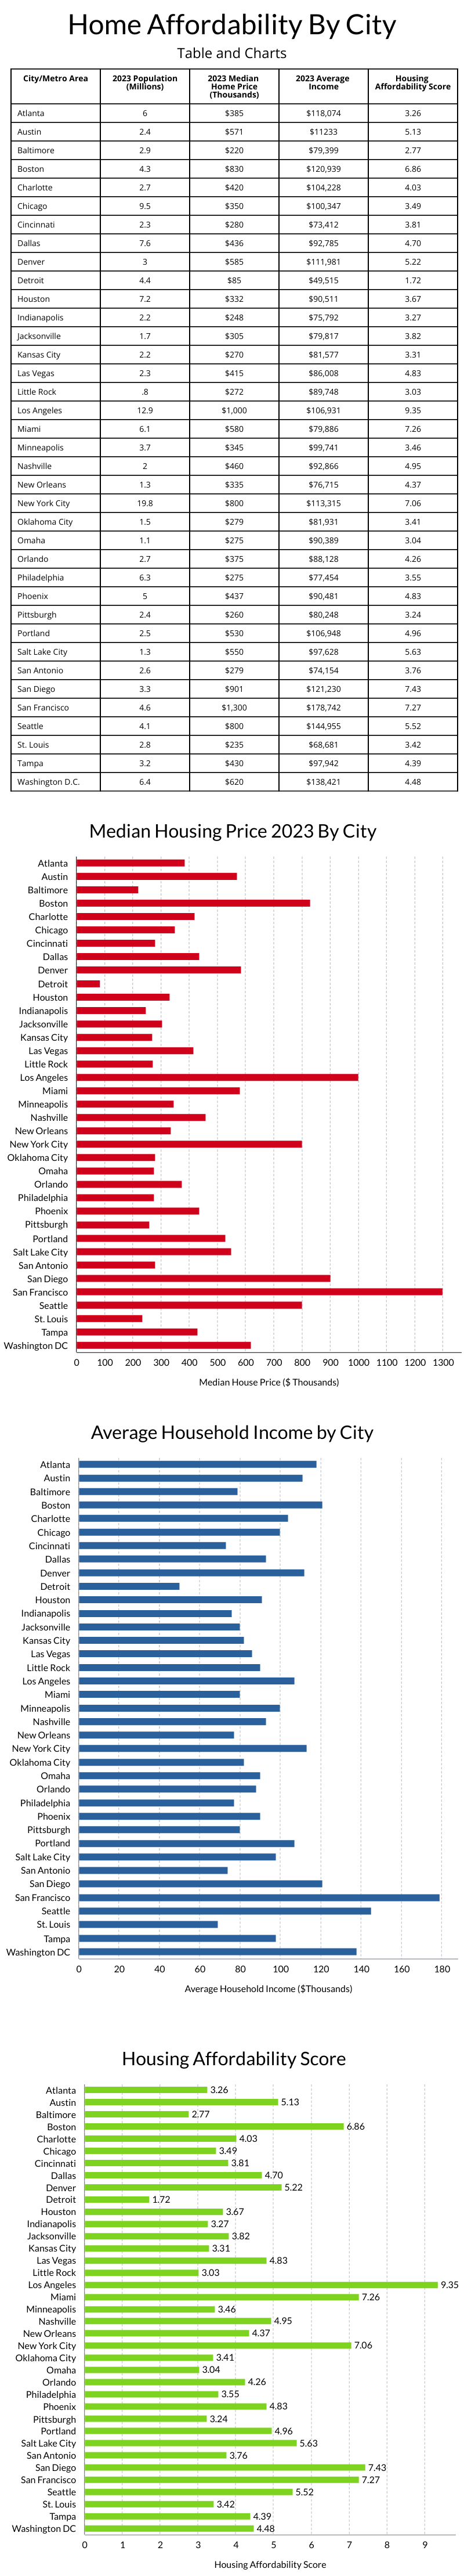 Home Affordability In America's Cities 2023